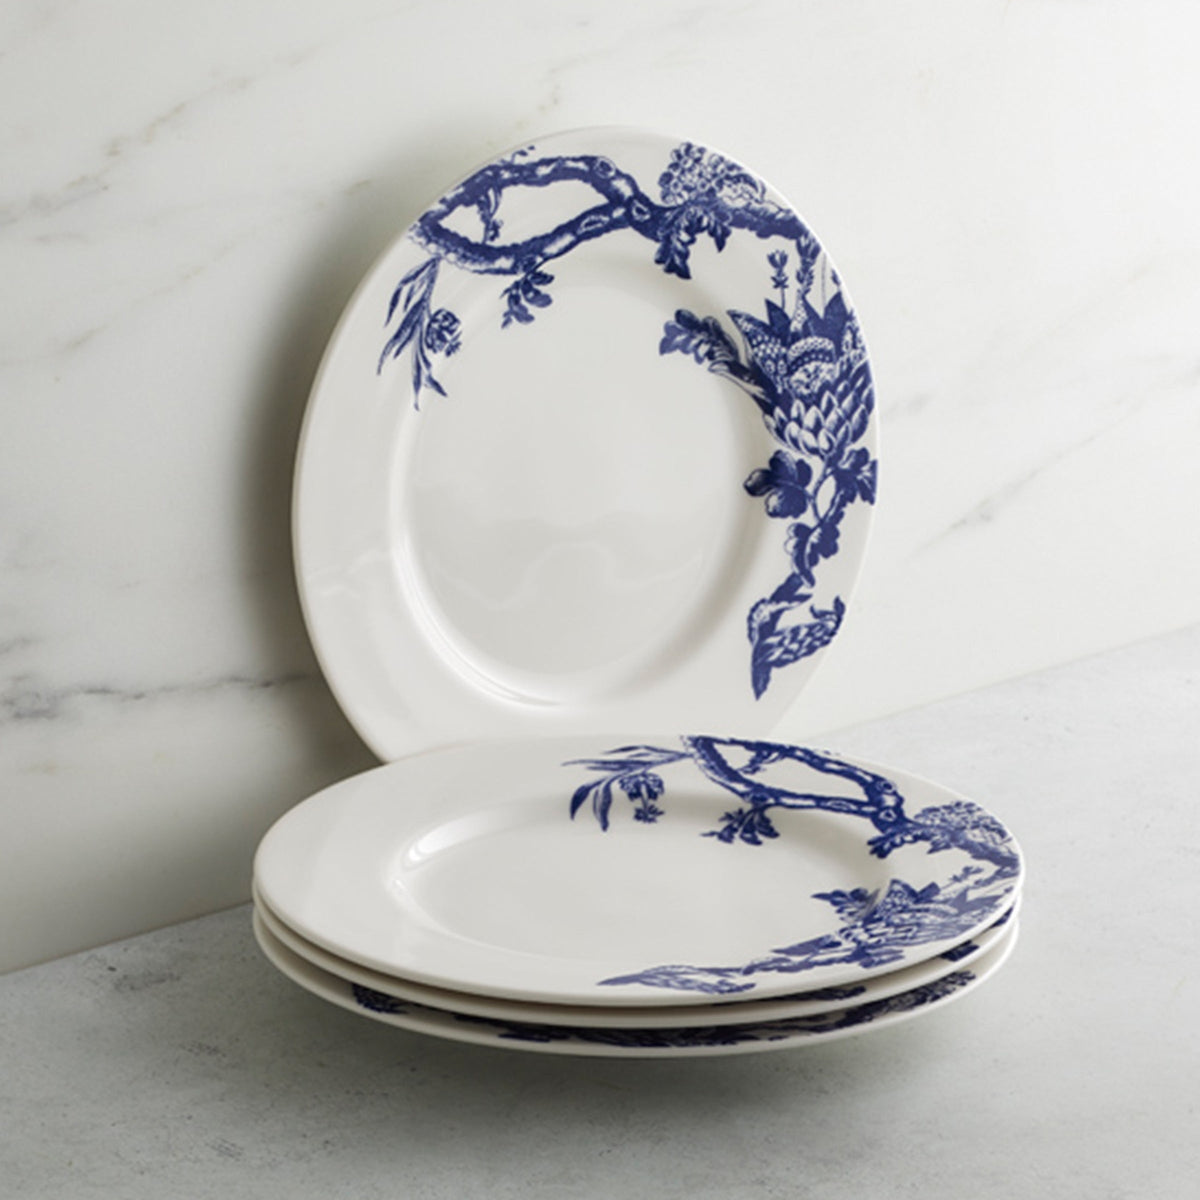 Three Arcadia Blue and White Porcelain Salad Plates are stacked, with a fourth upright to show off the floral pattern.